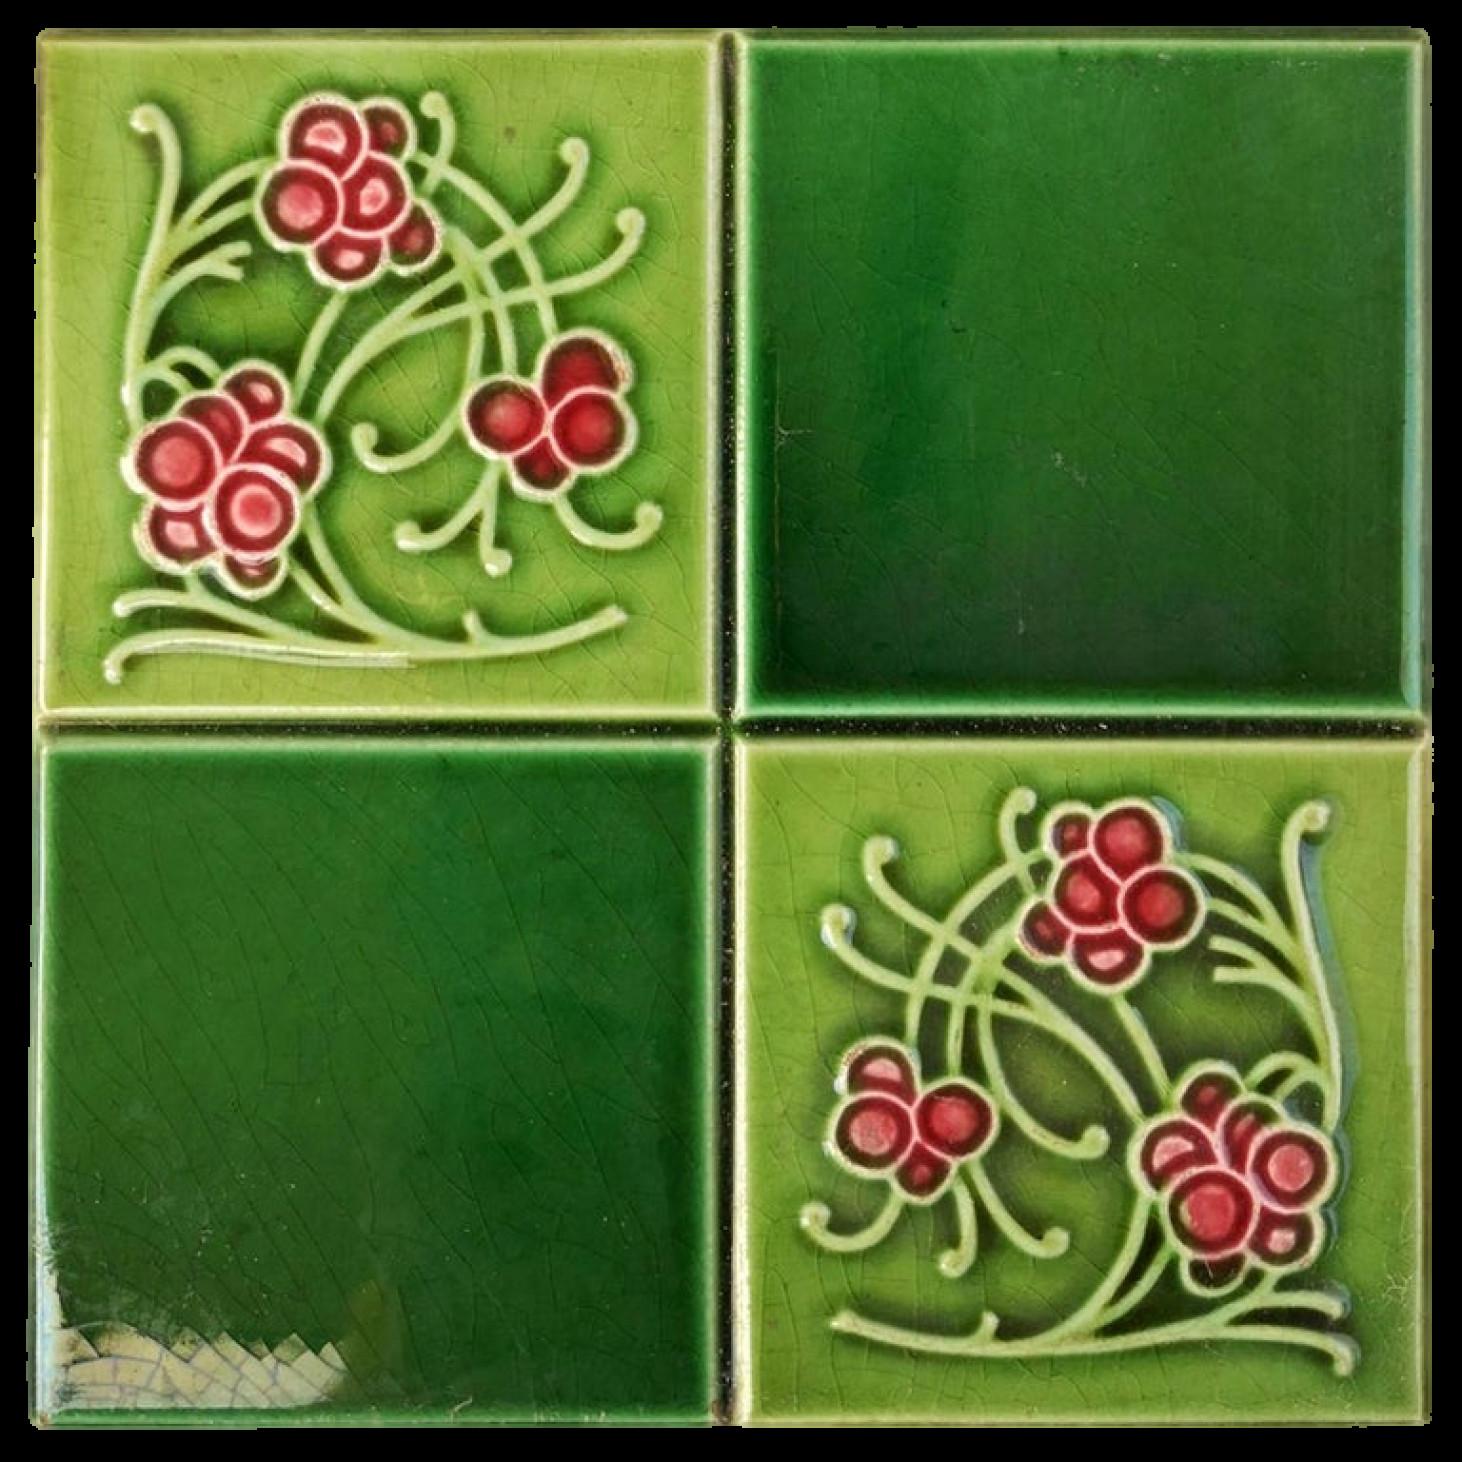 1 of the 30 amazing tiles in rich green and bright pink colors. Each tile is divided into four faces. Manufactured around 1925 by Gilliot Frères, Hemiksem, Belgium. These tiles would be charming displayed on easels, framed or incorporated into a